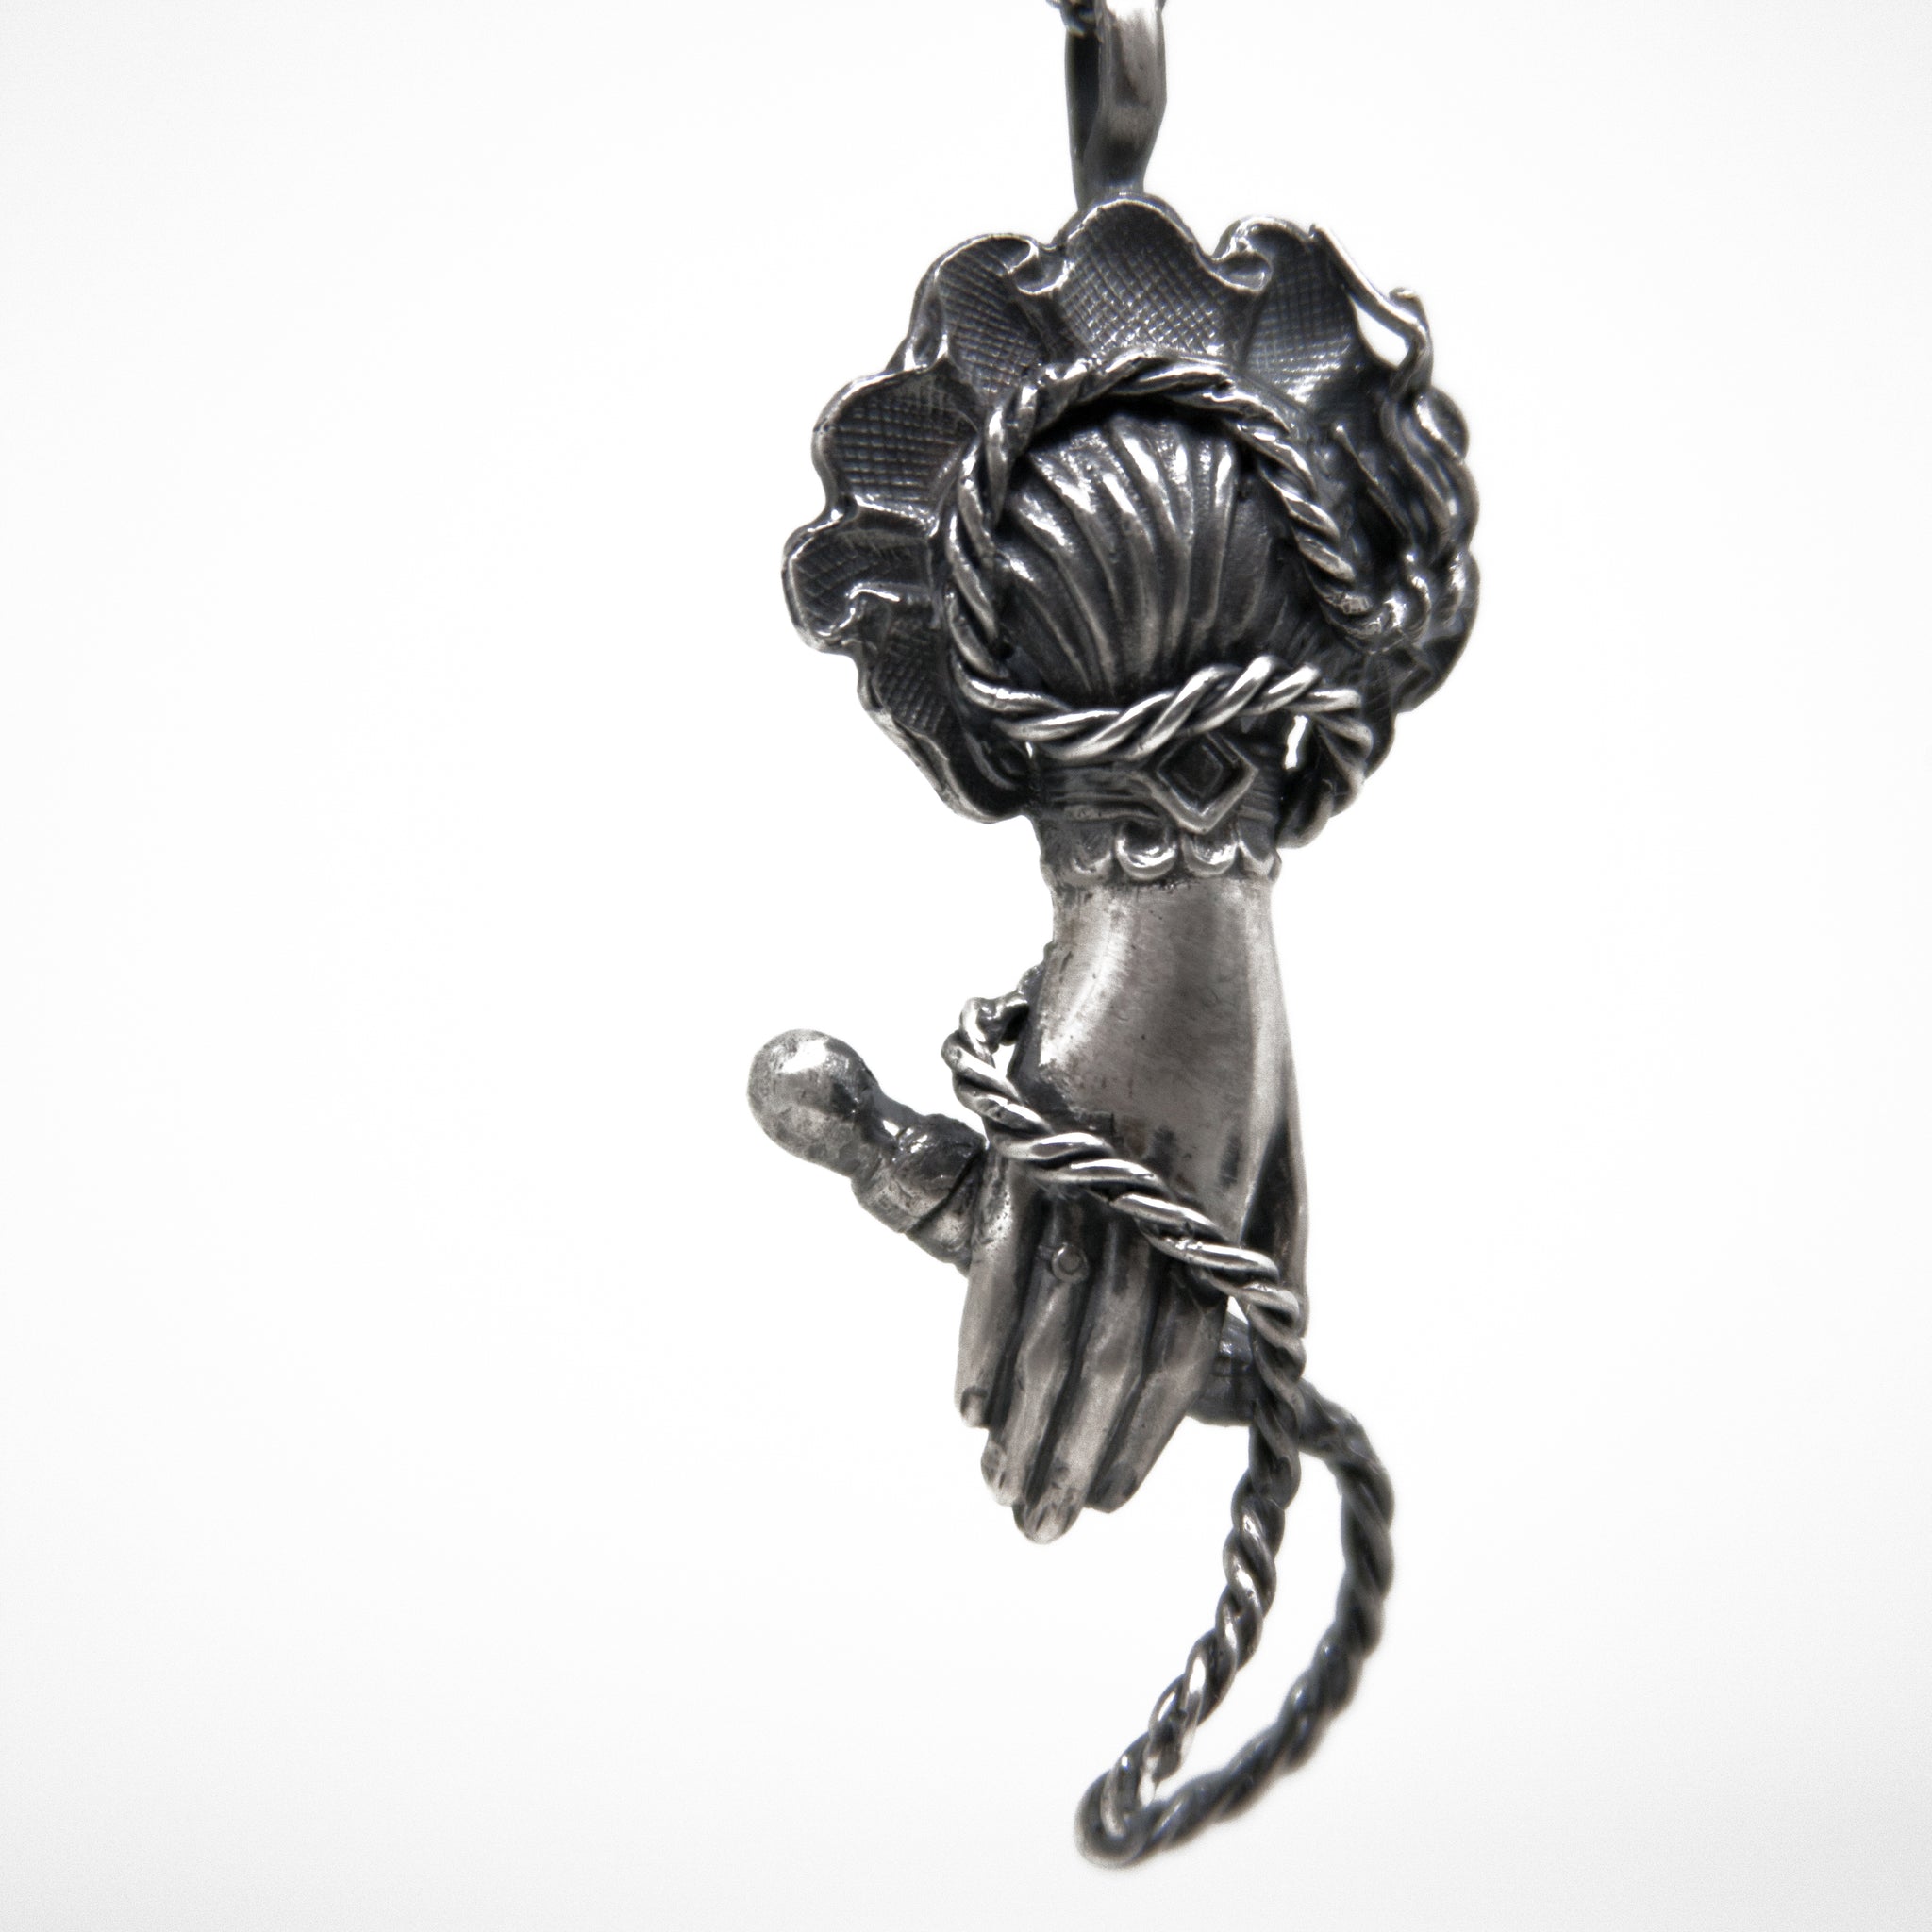 Venus in furs necklace in sterling silver